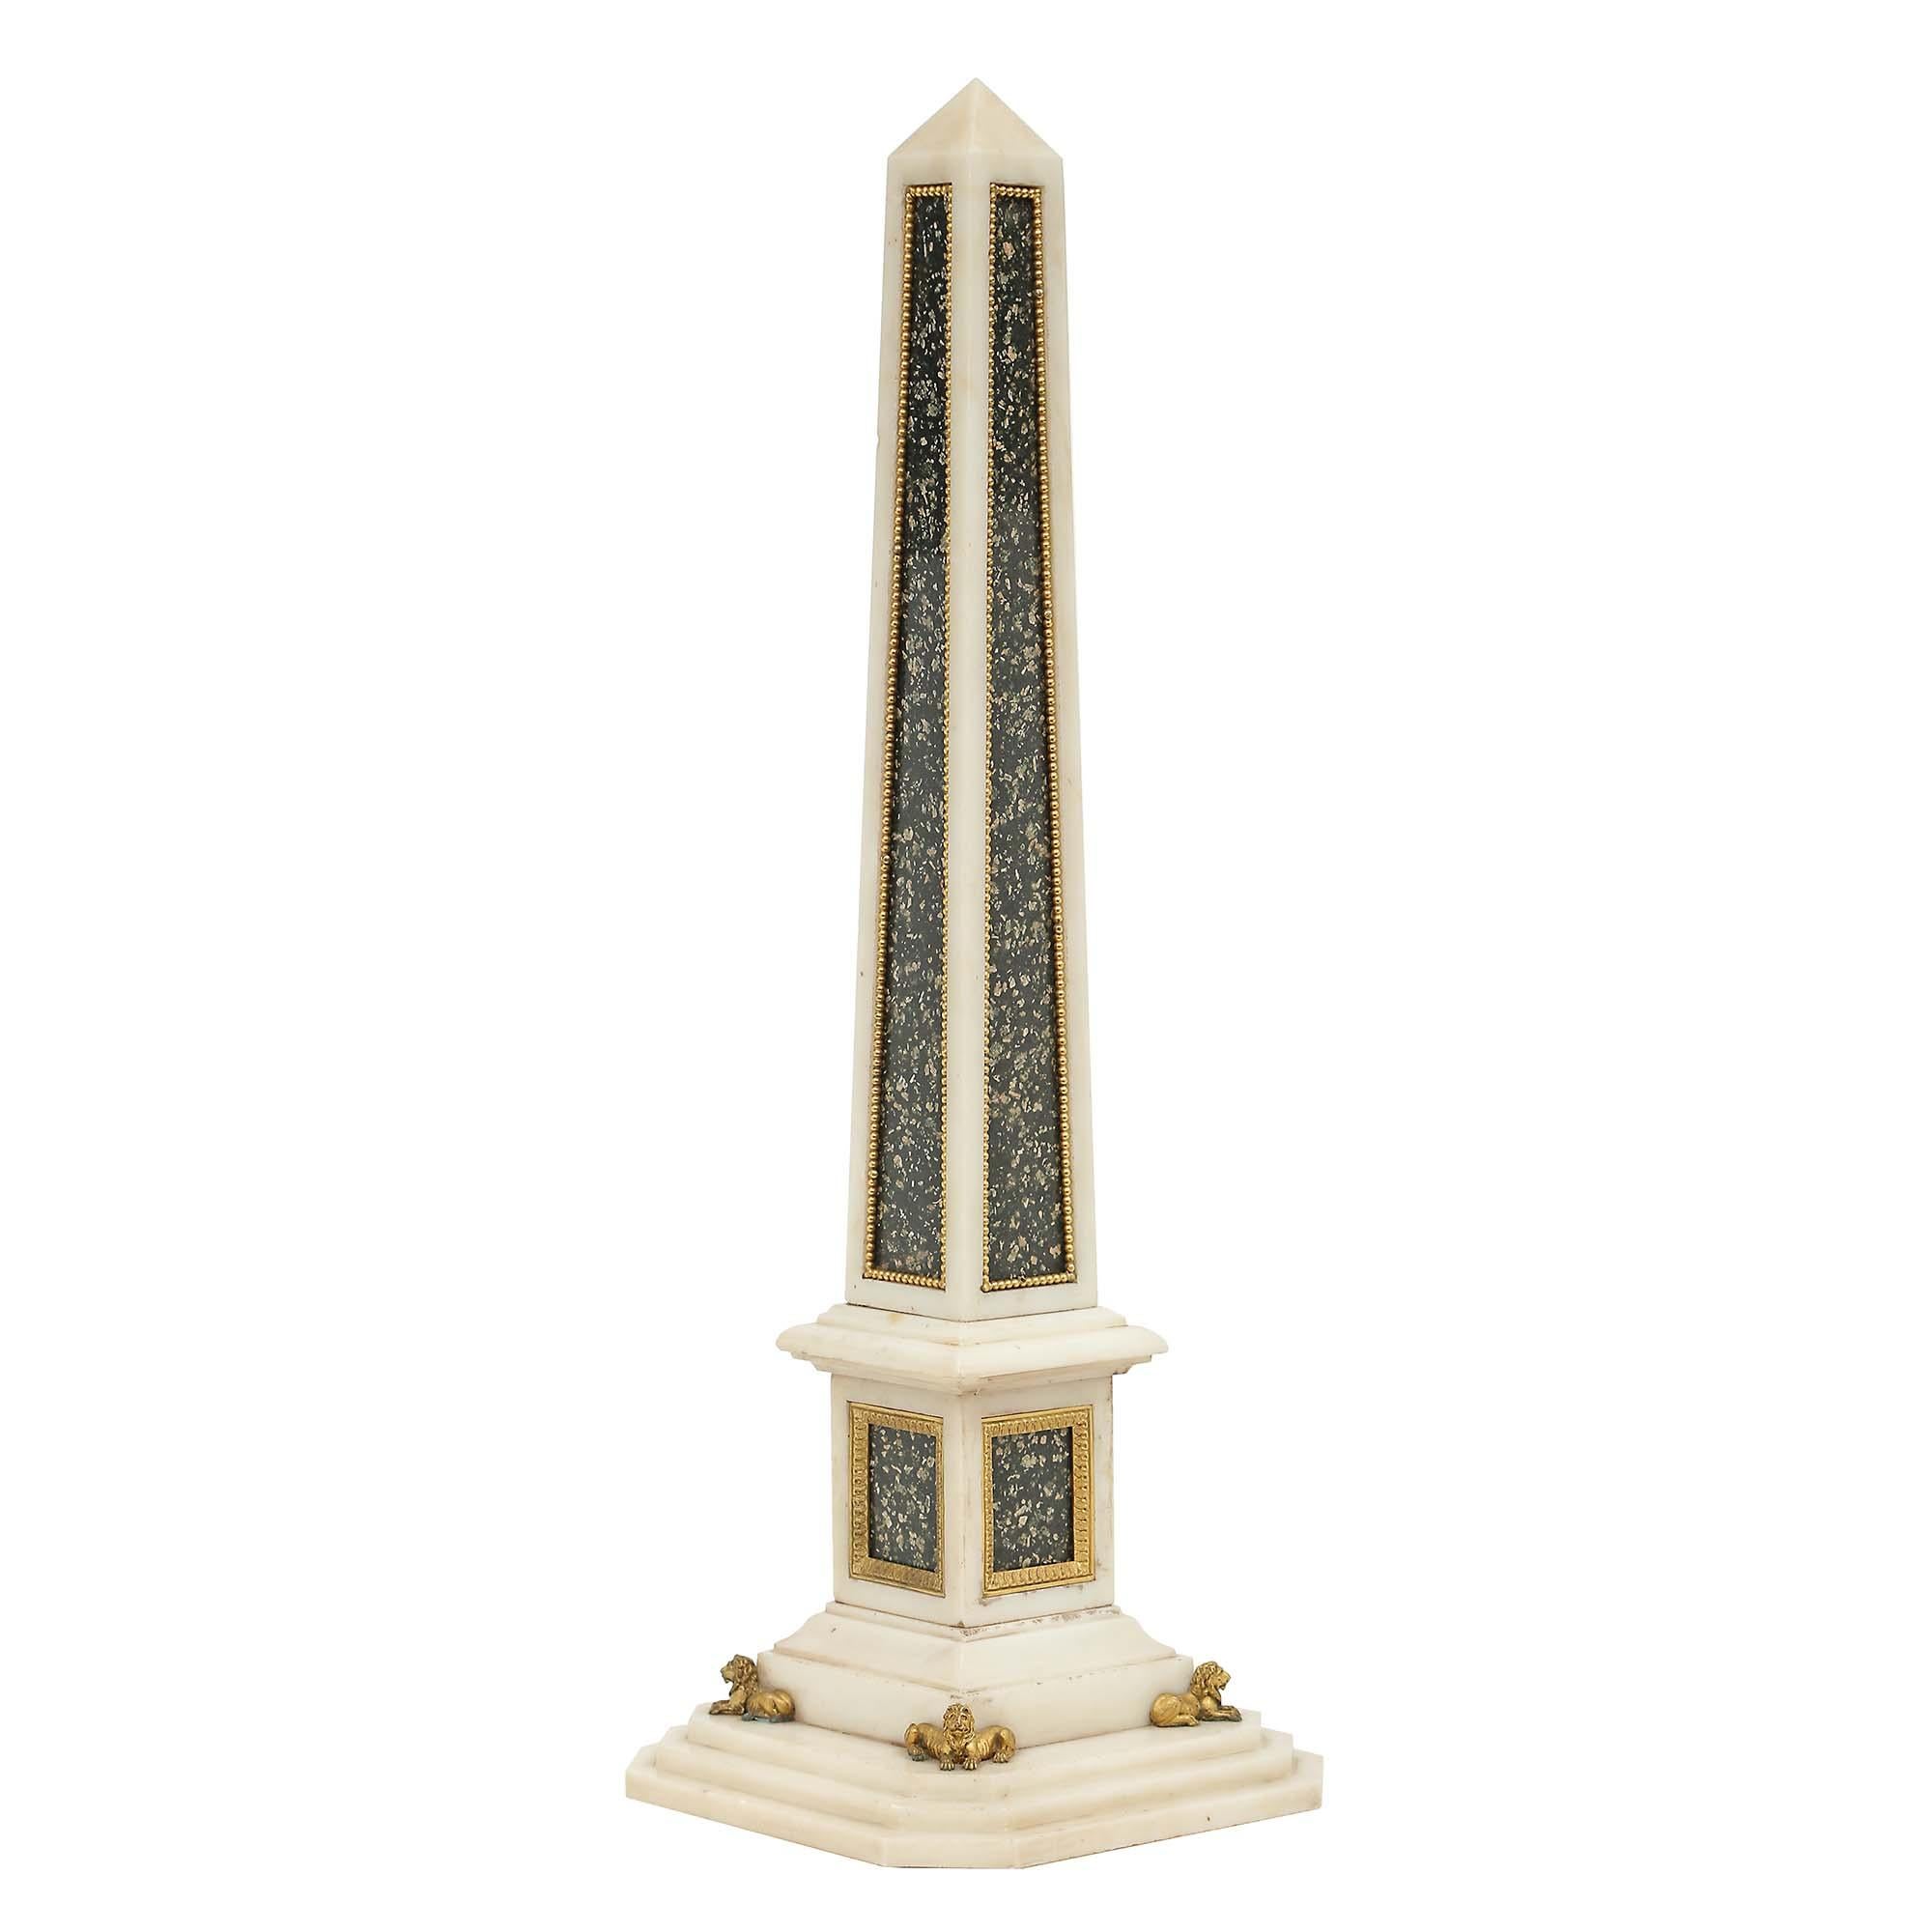 An impressive and very decorative Italian 19th century marble and ormolu obelisk. The handsome obelisk is raised on a square stepped white Carrara marble base with cut corners, accented with a finely chased ormolu lion at each corner. The obelisk